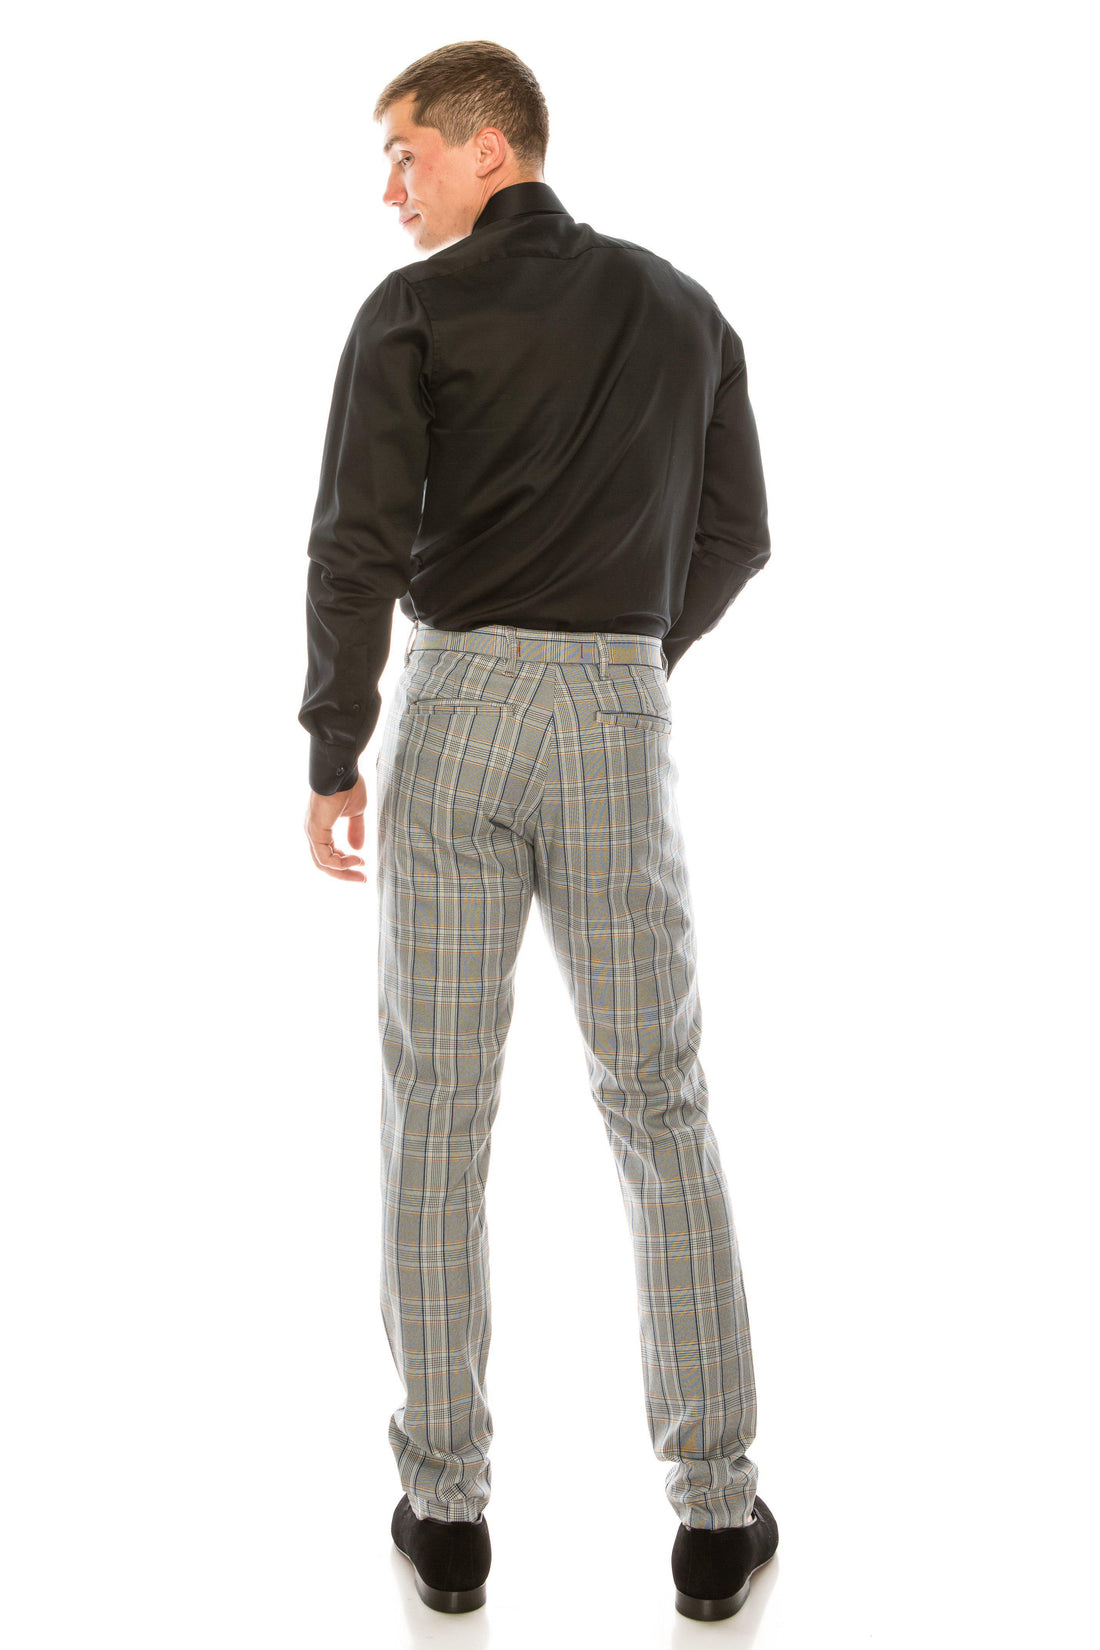 Patterned Slim Fit Casual Trouser- GREY MUSTARD - Ron Tomson